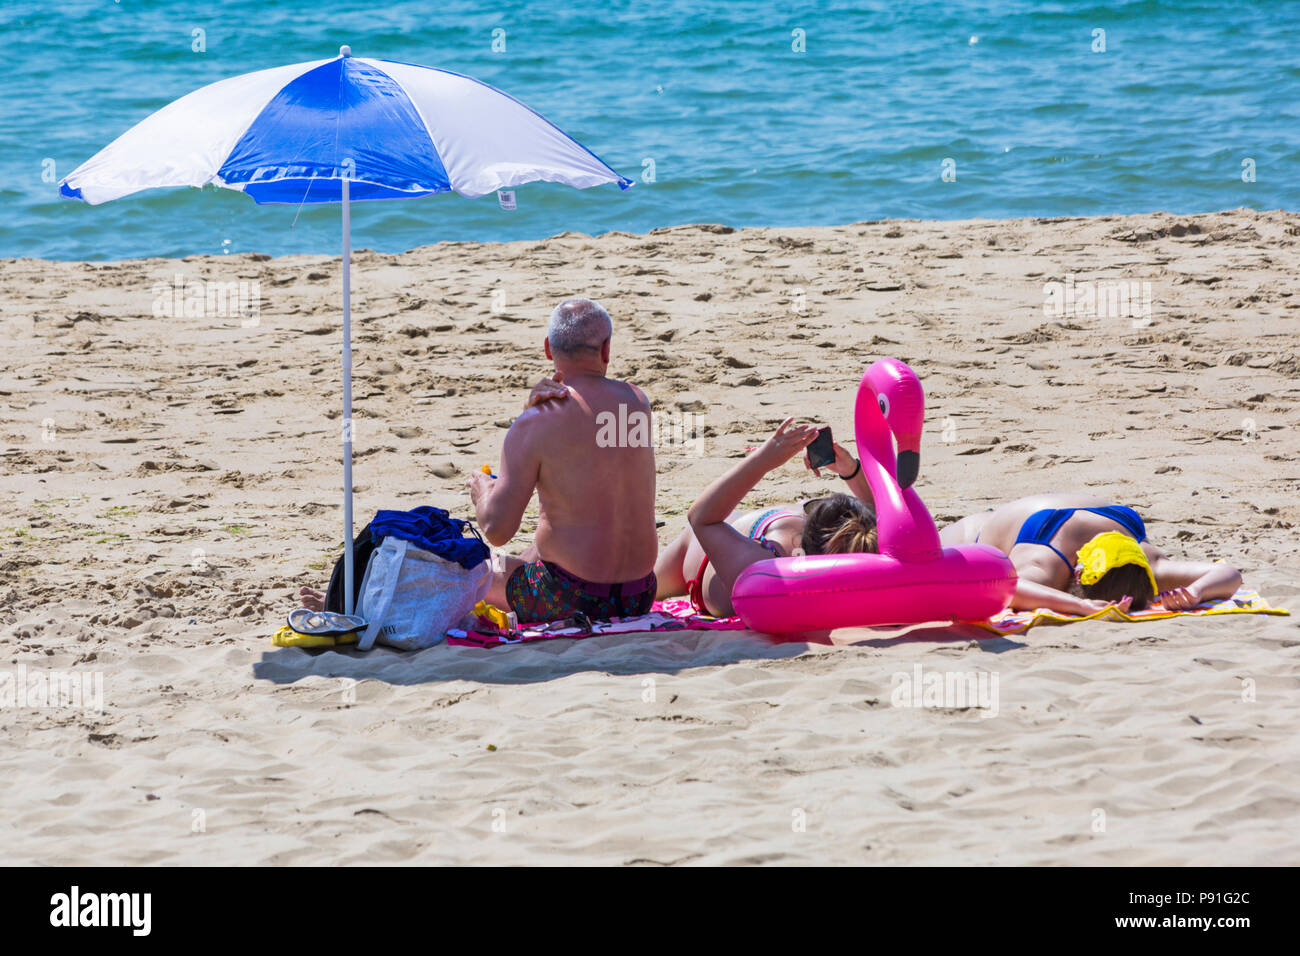 Bournemouth, Dorset, UK. 14th July 2018. UK weather: The heatwave continues with another hot sunny day, as sunseekers make the most of the glorious weather and head to the seaside at Bournemouth beaches. Sunbathers on the beach. Credit: Carolyn Jenkins/Alamy Live News Stock Photo